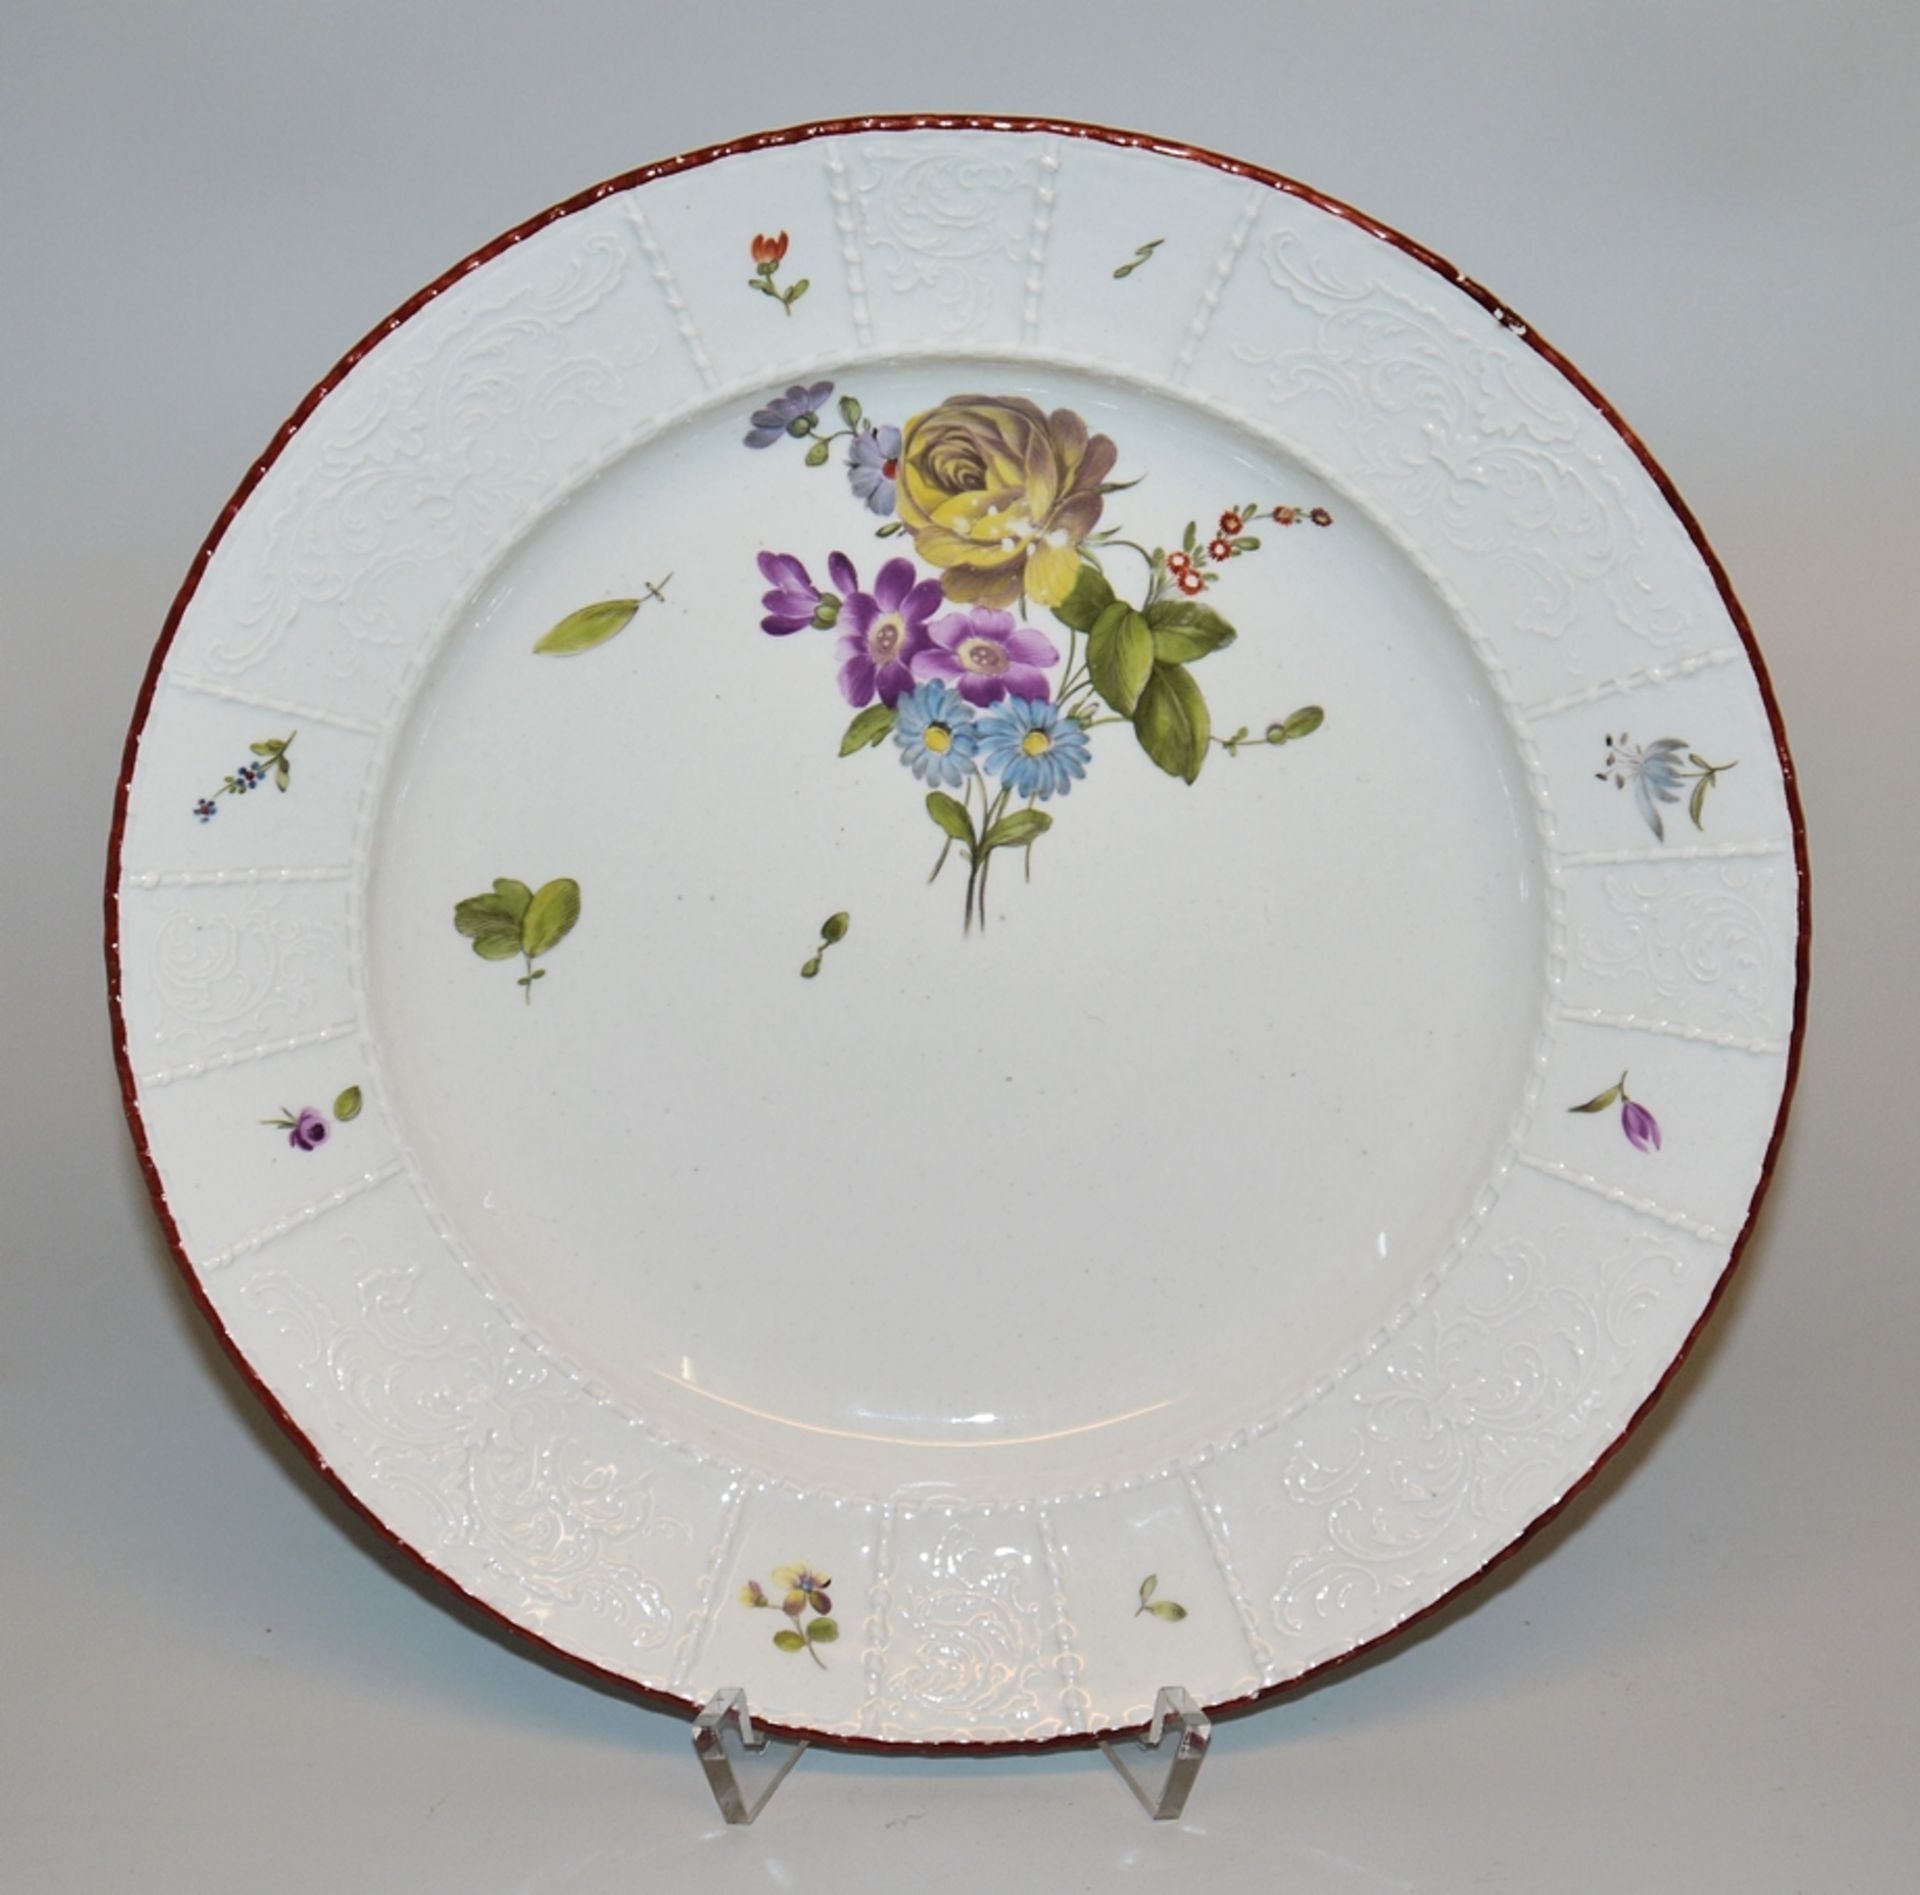 Porcelain plate with floral painting, Ludwigsburg circa 1765